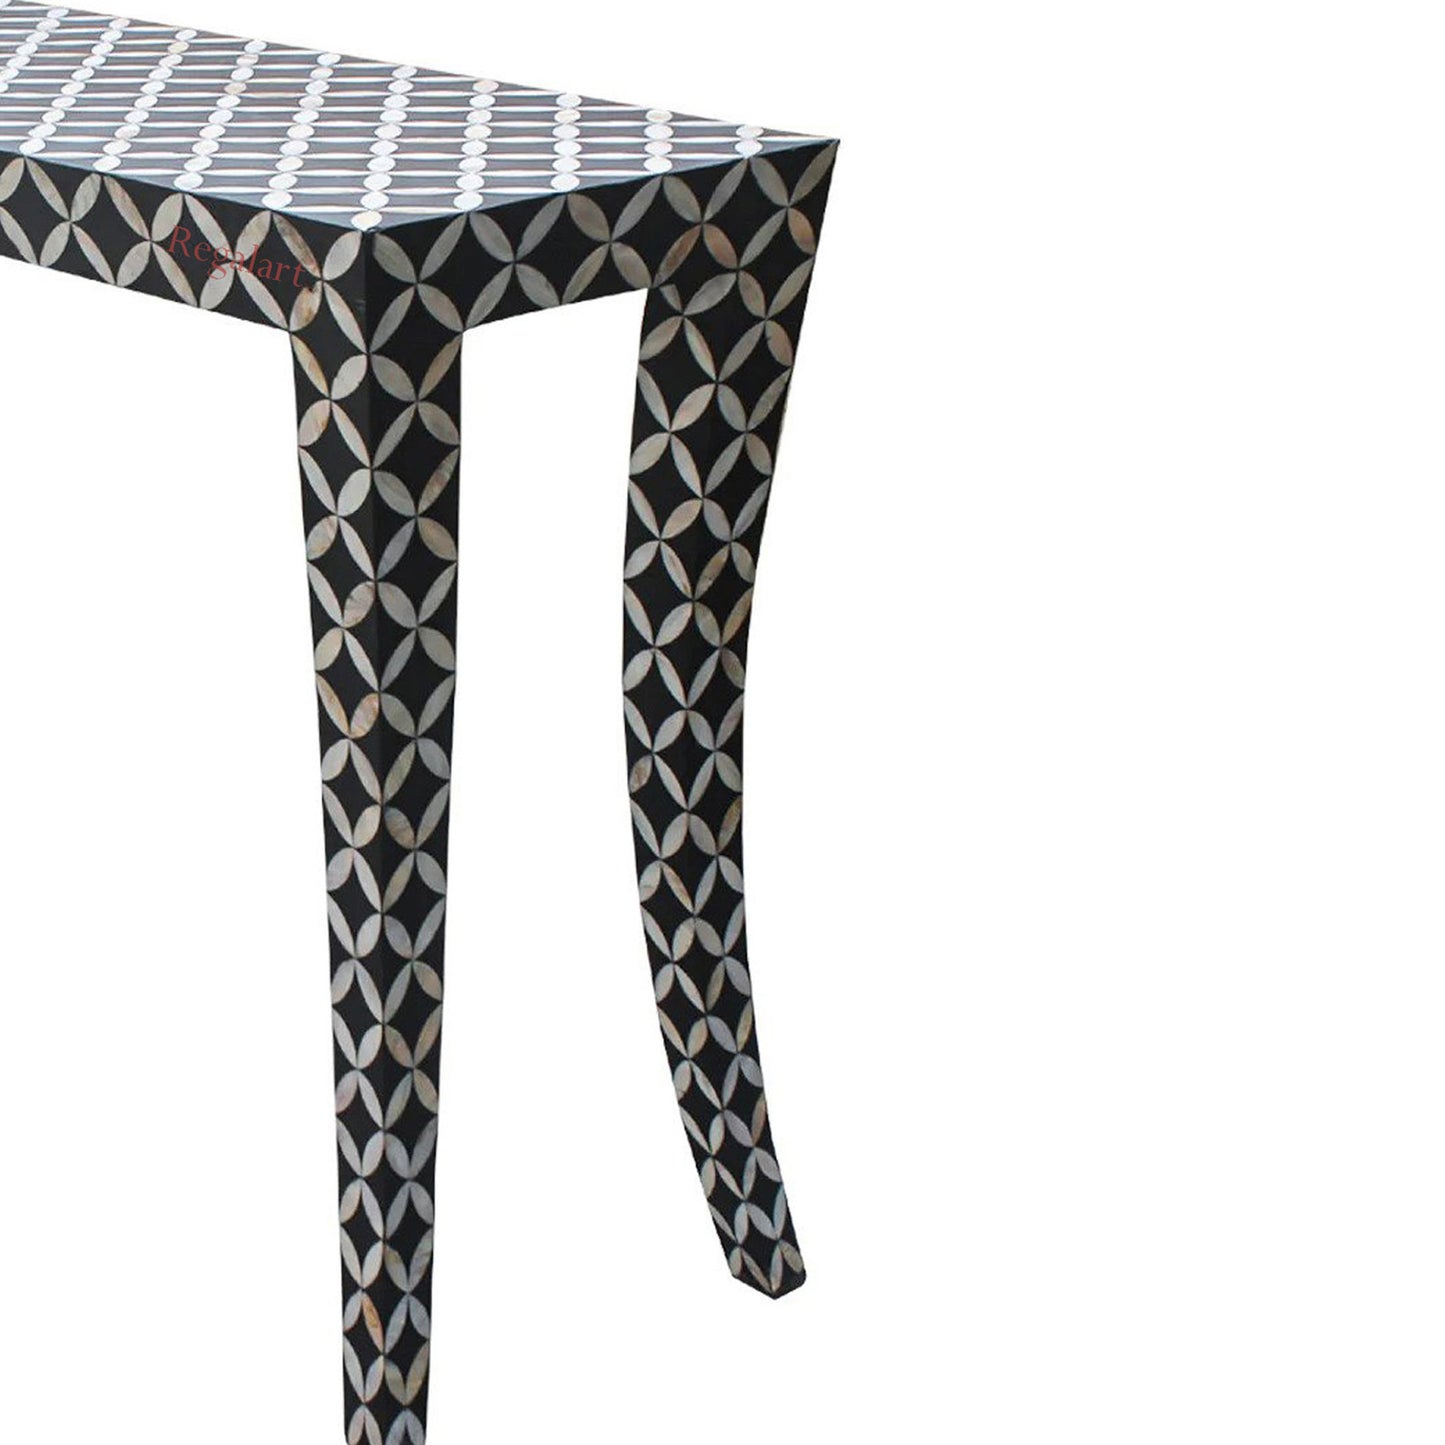 Bone Inlay Console Table Handmade Desk, Study Table, Entryway Console Table